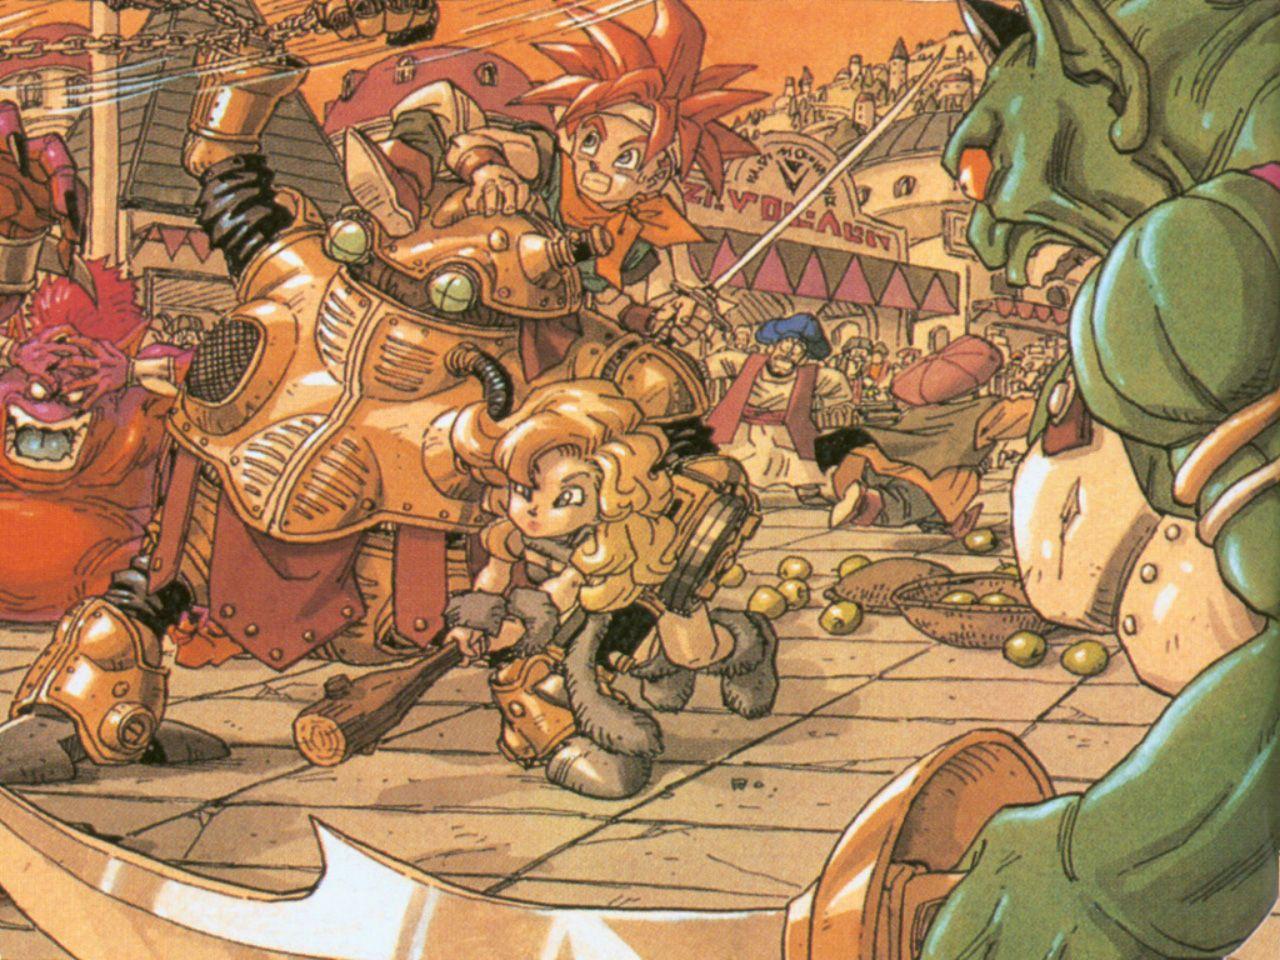 Chrono Trigger Wallpaper and Background Imagex960